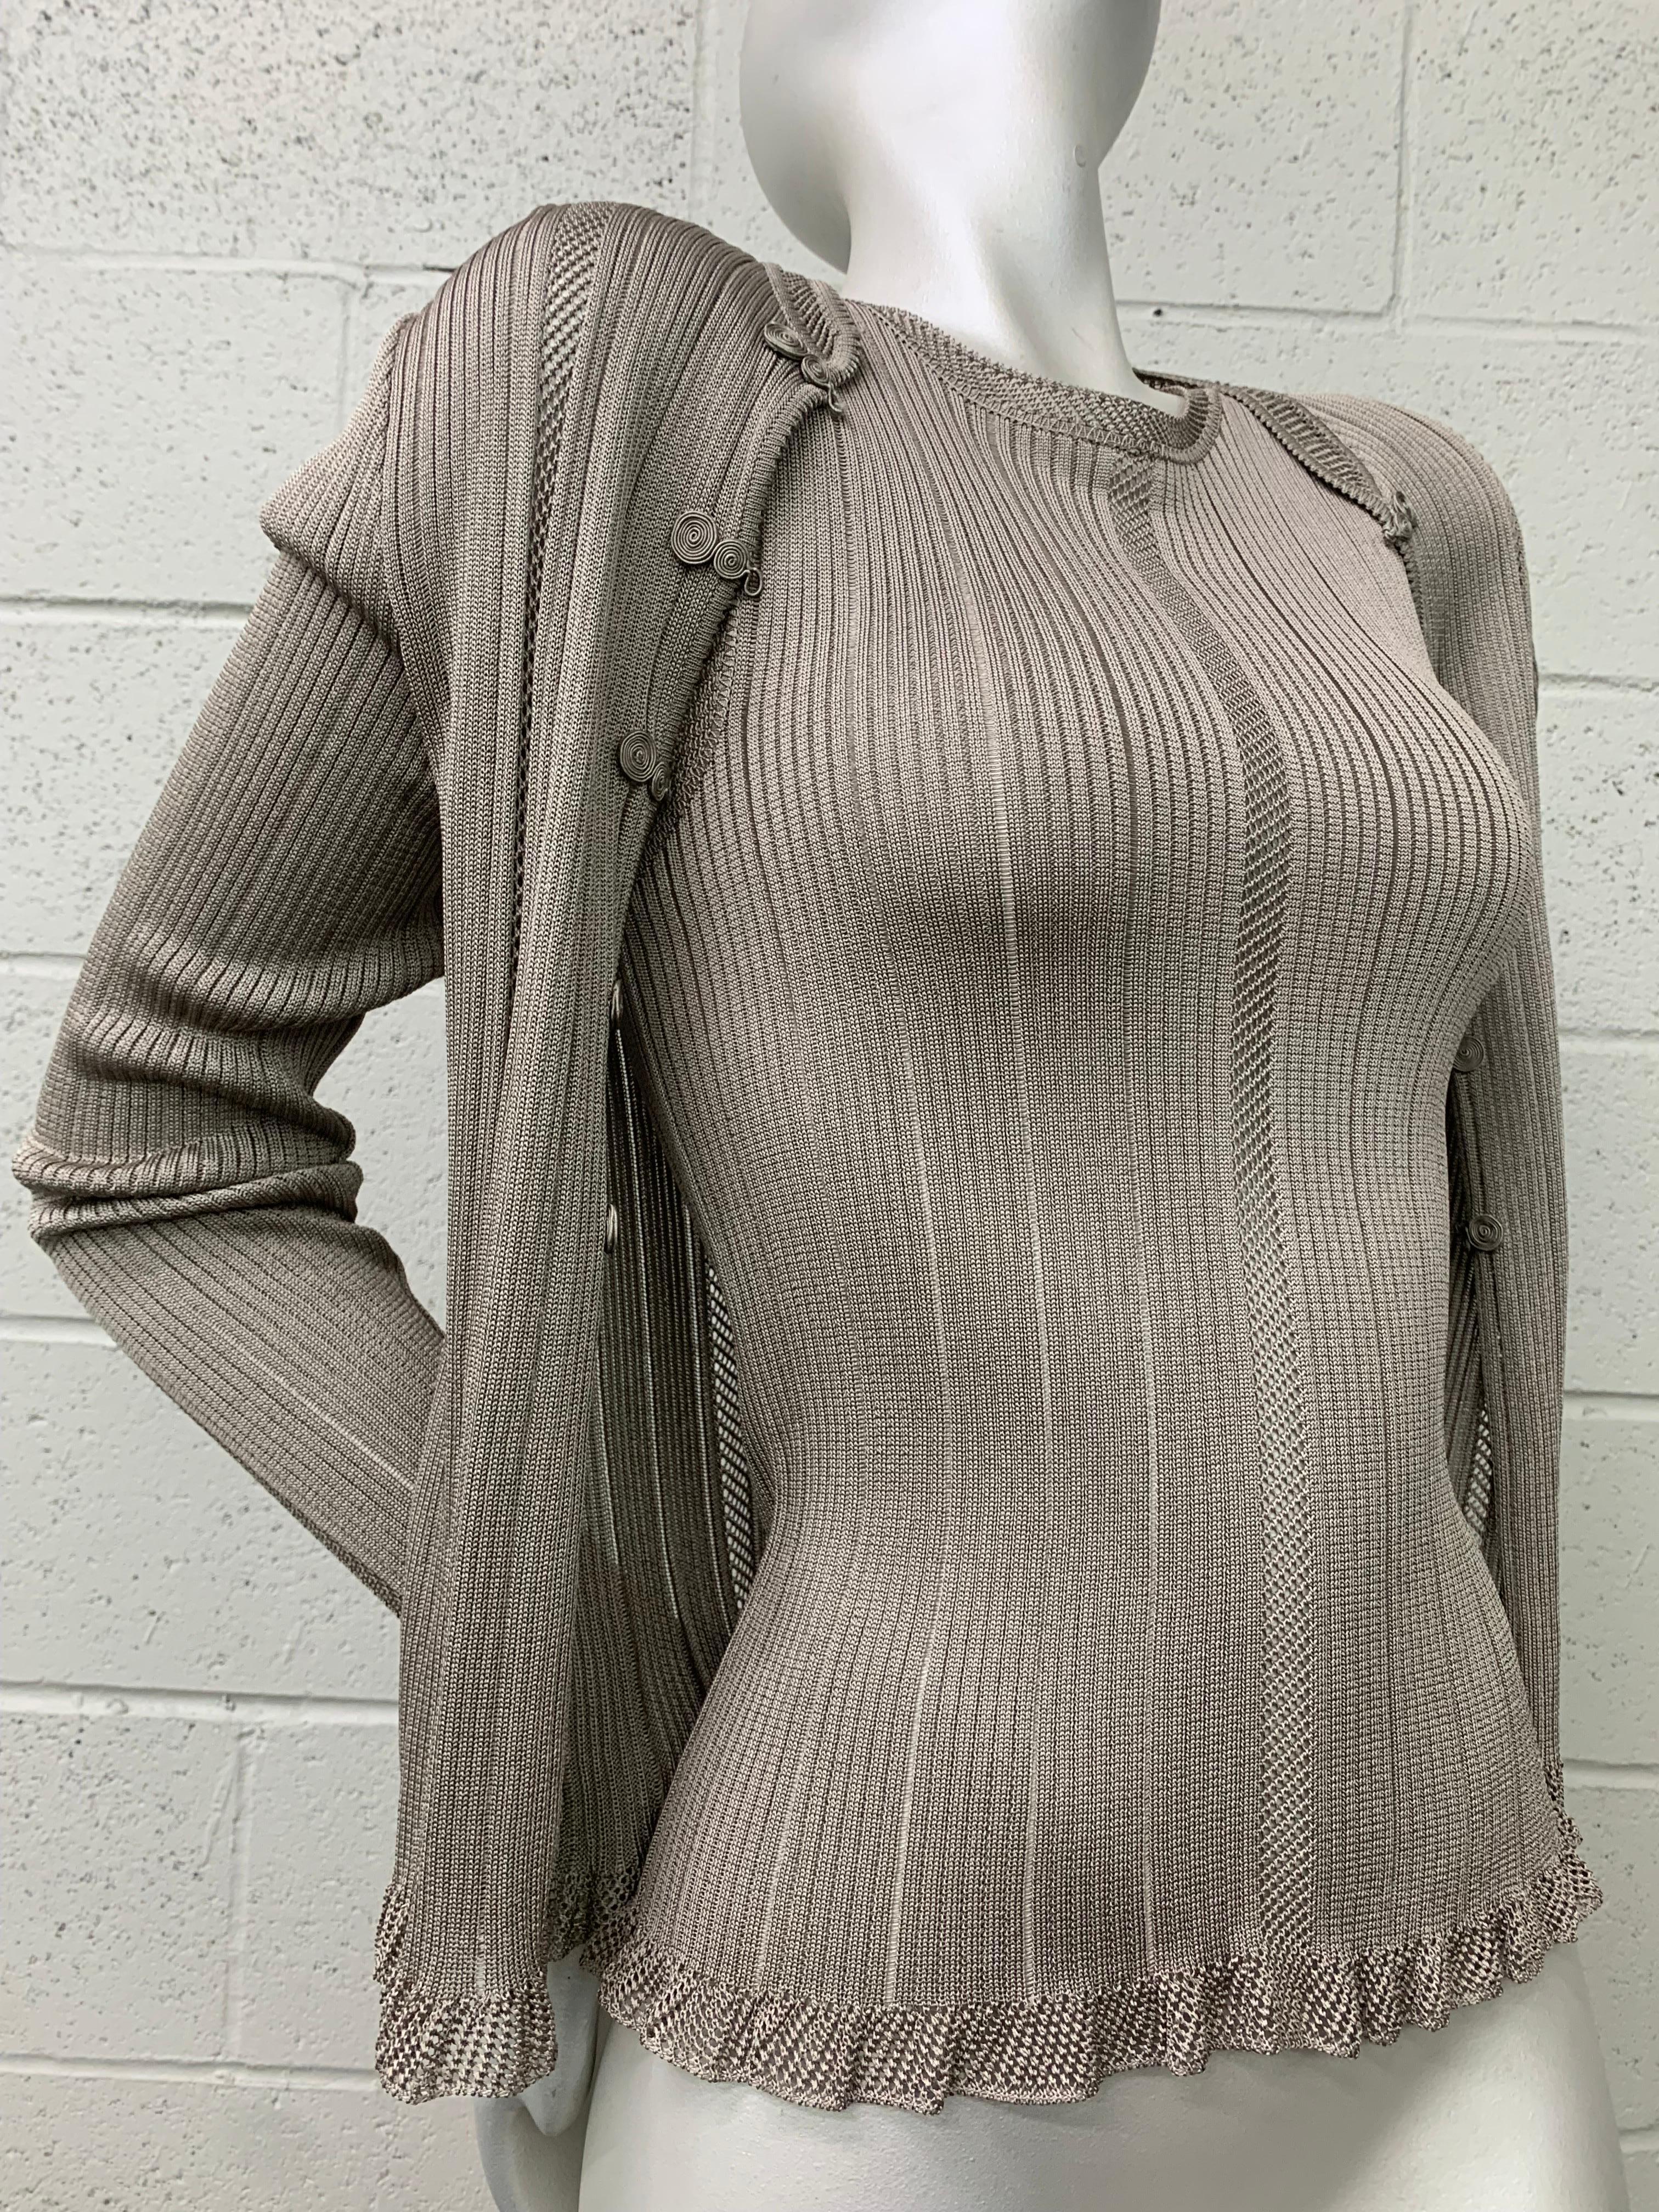 2000 John Galliano Dove Gray Viscose Rib-Knit Twin Set w Lightly Ruffled Edges: Sleeveless tank under piece with long-sleeved cardigan sweater. With corded medallion frog closures. New, never worn. Size Medium.